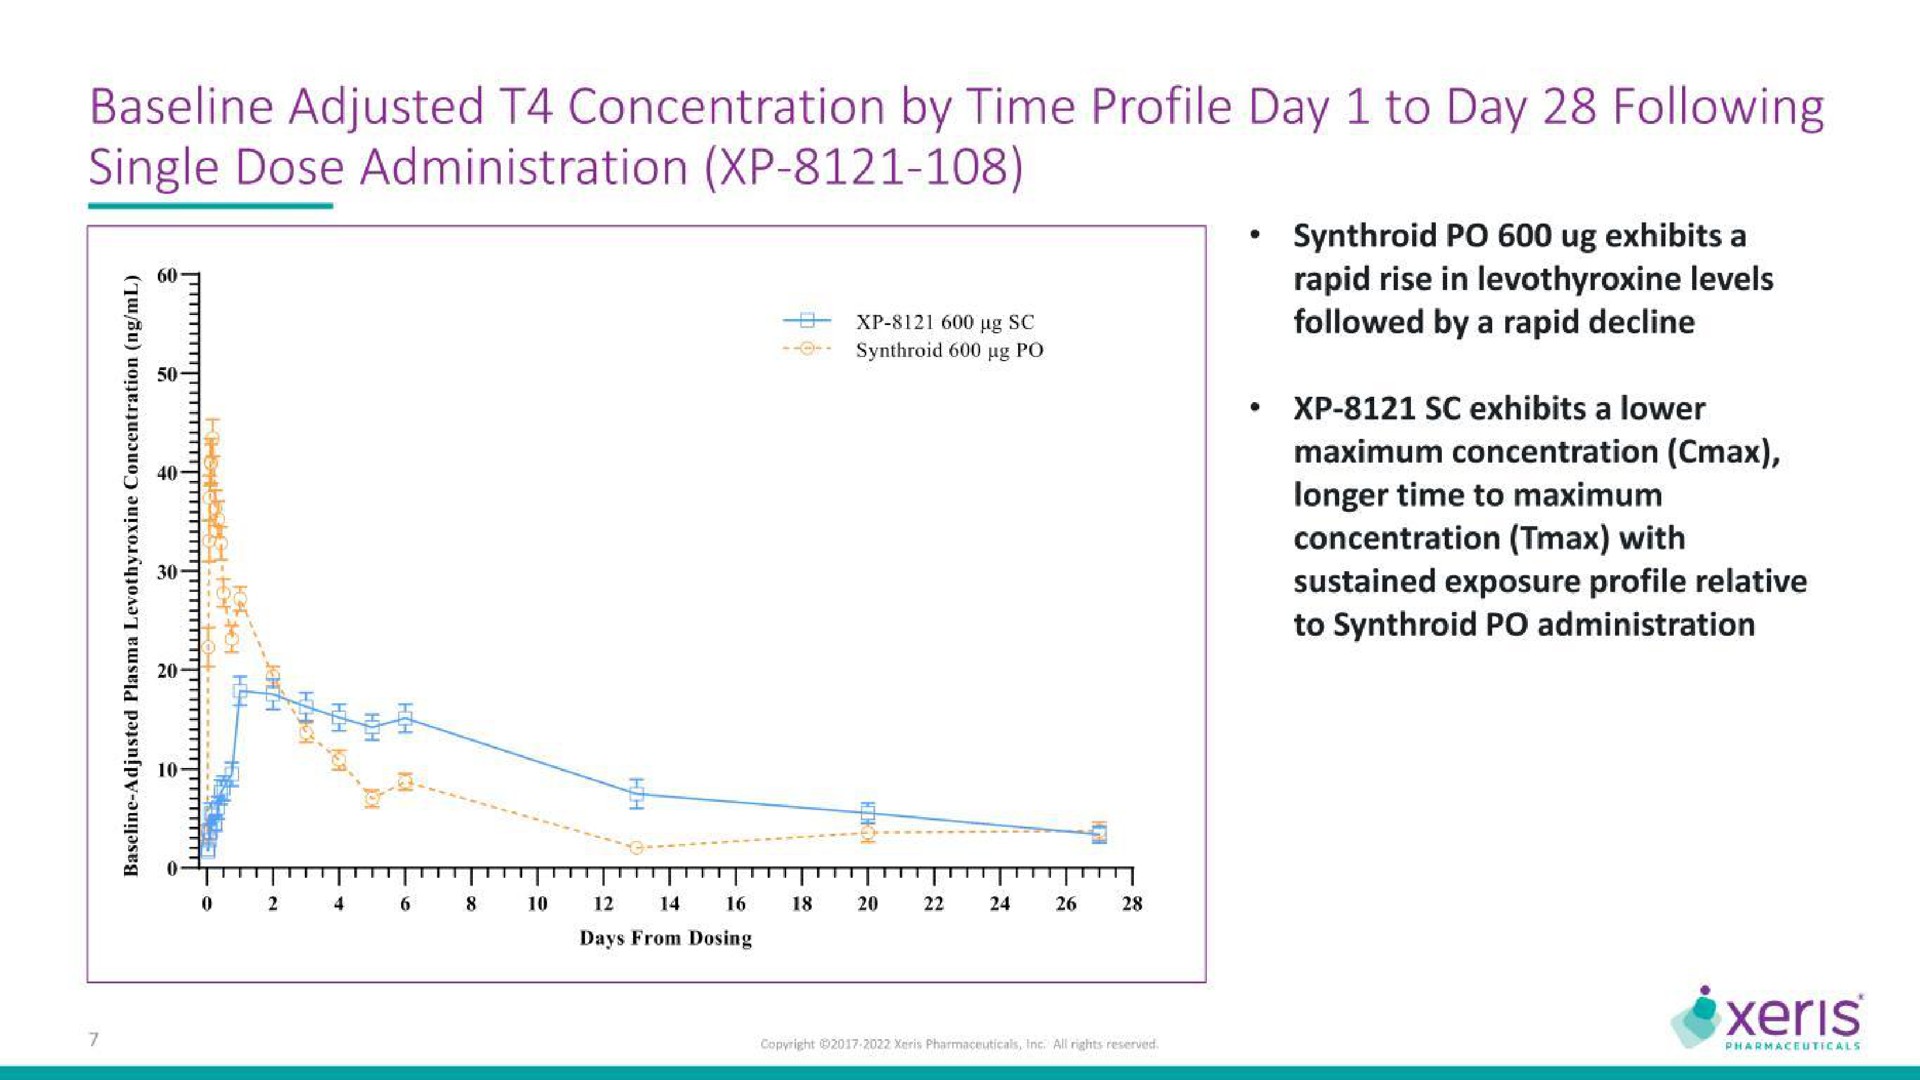 adjusted concentration by time profile day to day following single dose administration | Xeris Biopharma